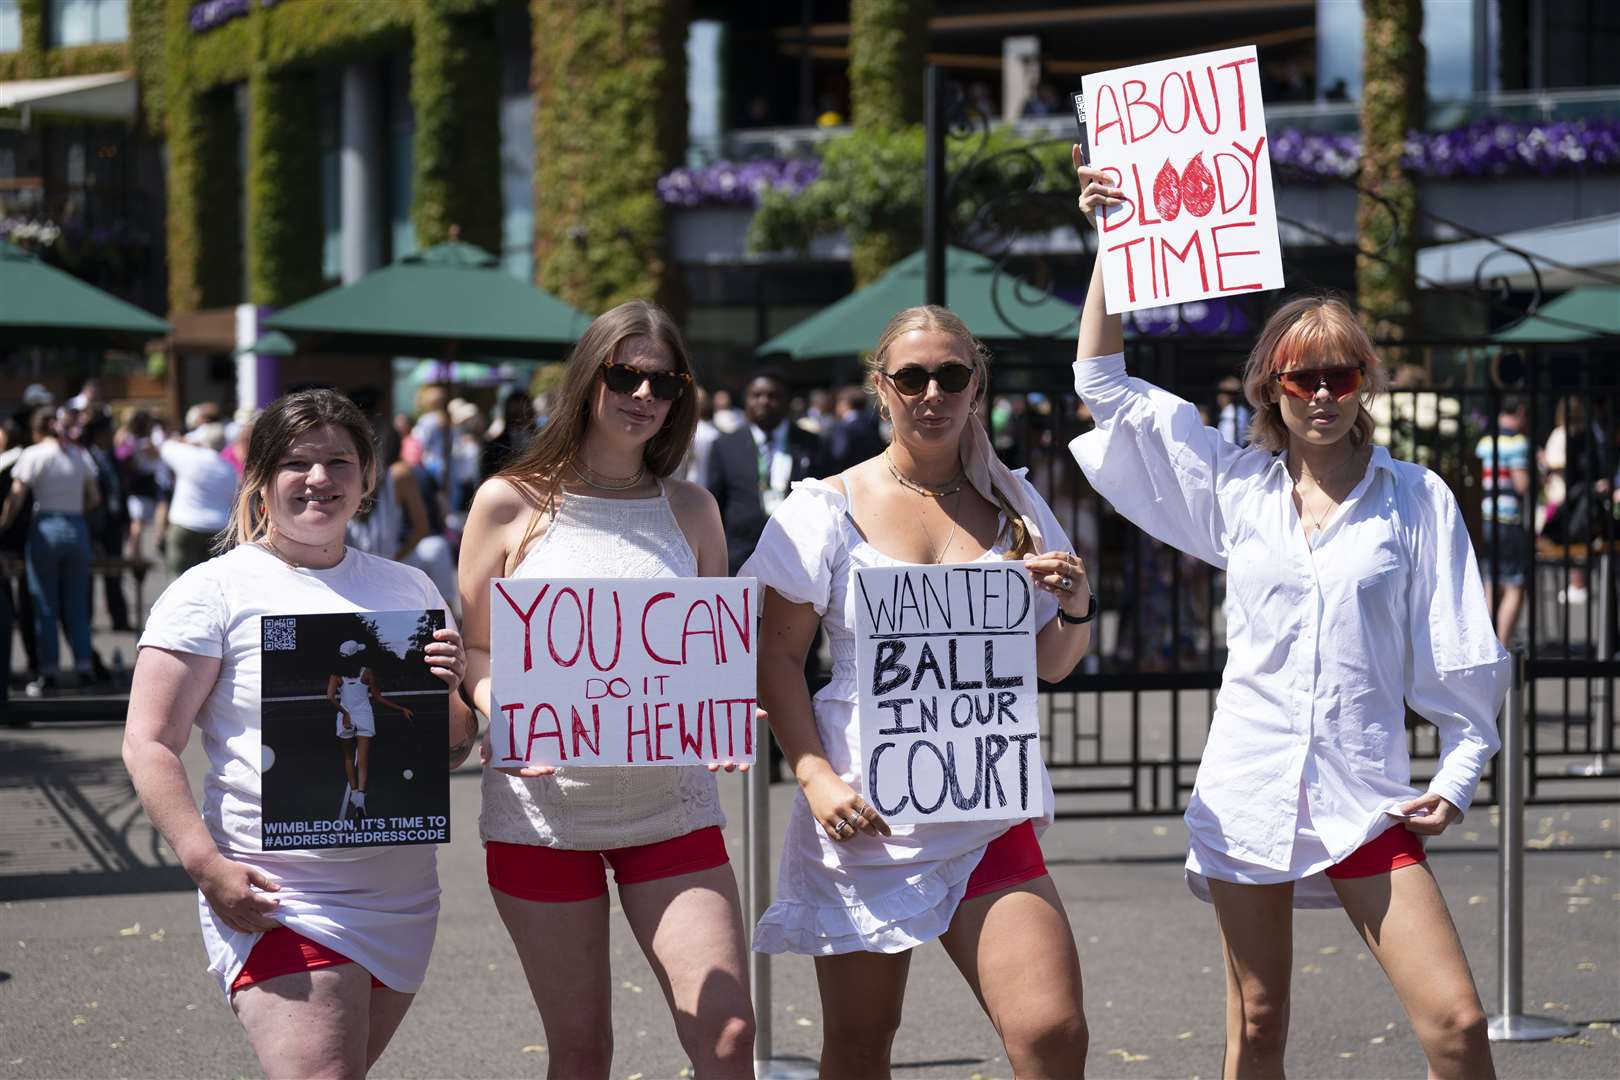 Campaigners from Address The Dress Code outside the main gate at Wimbledon (Kirsty O’Connor/PA)